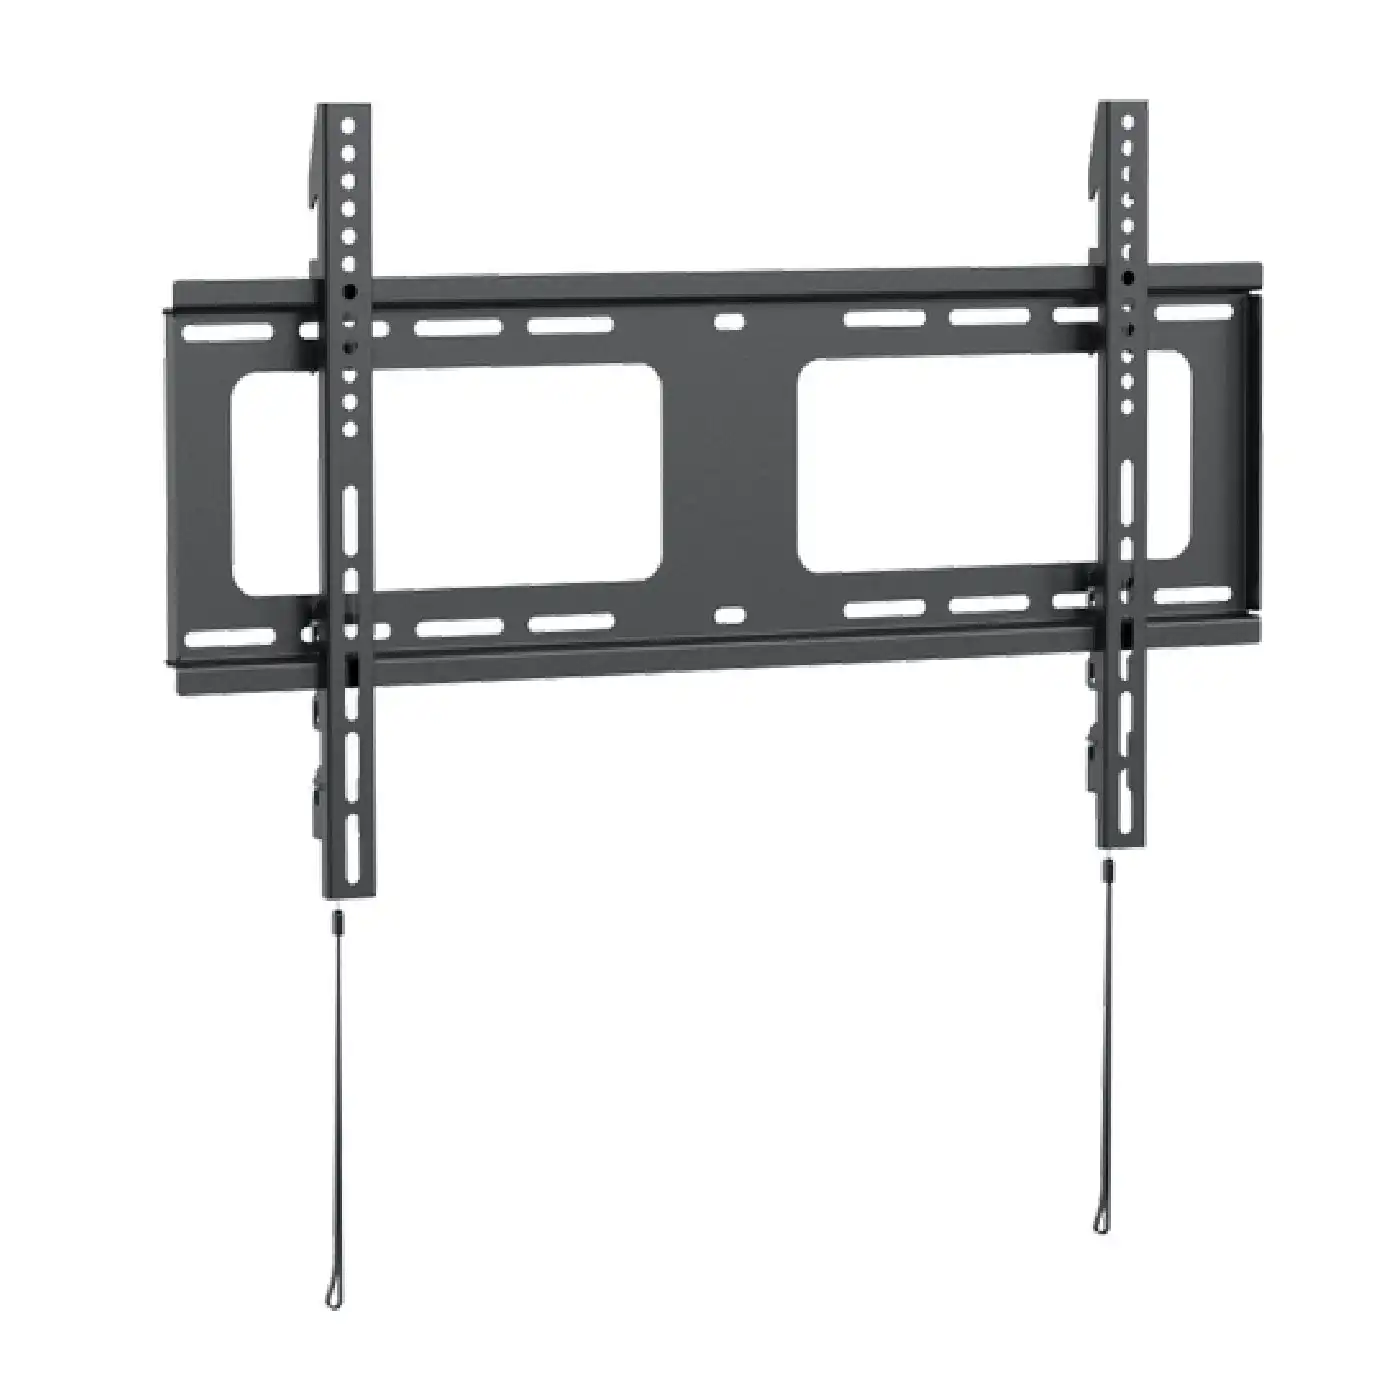 Laser Ultra Slim TV Wall Mount for 37 - 80in Screens - Supports up to 80kg